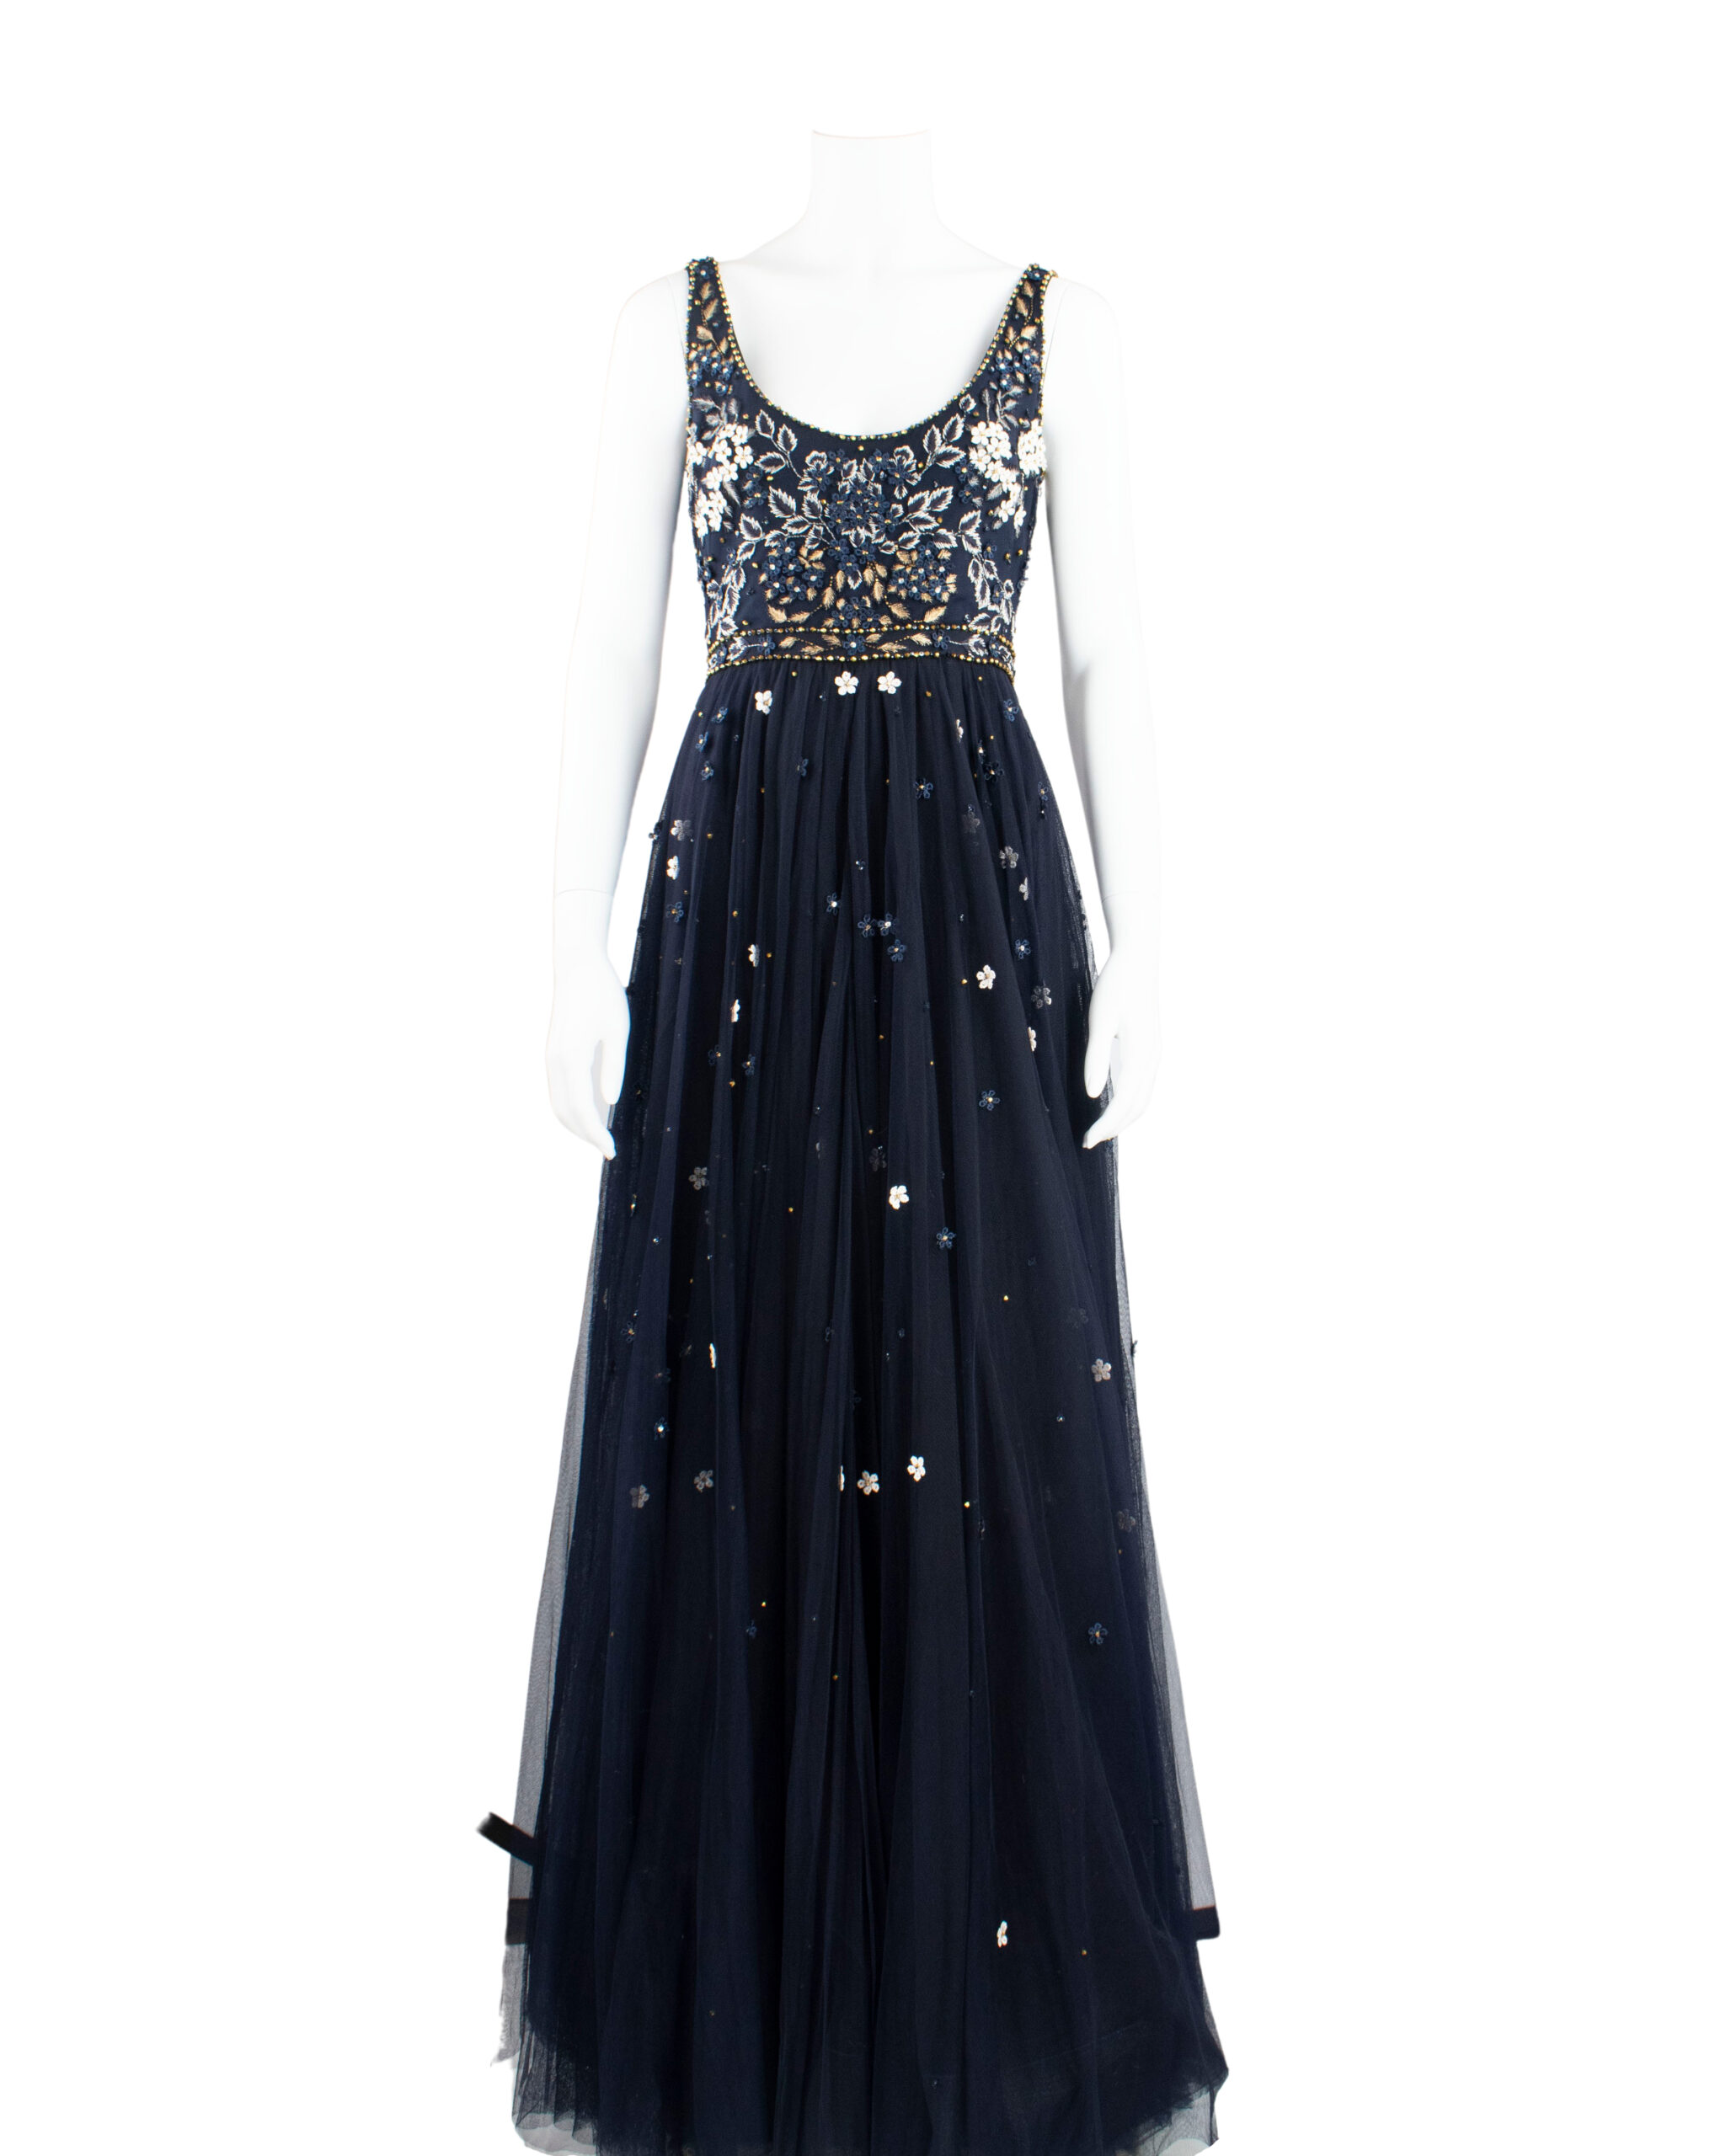 Bubbleroom Occasion Ivy Embellished Gown Navy 42